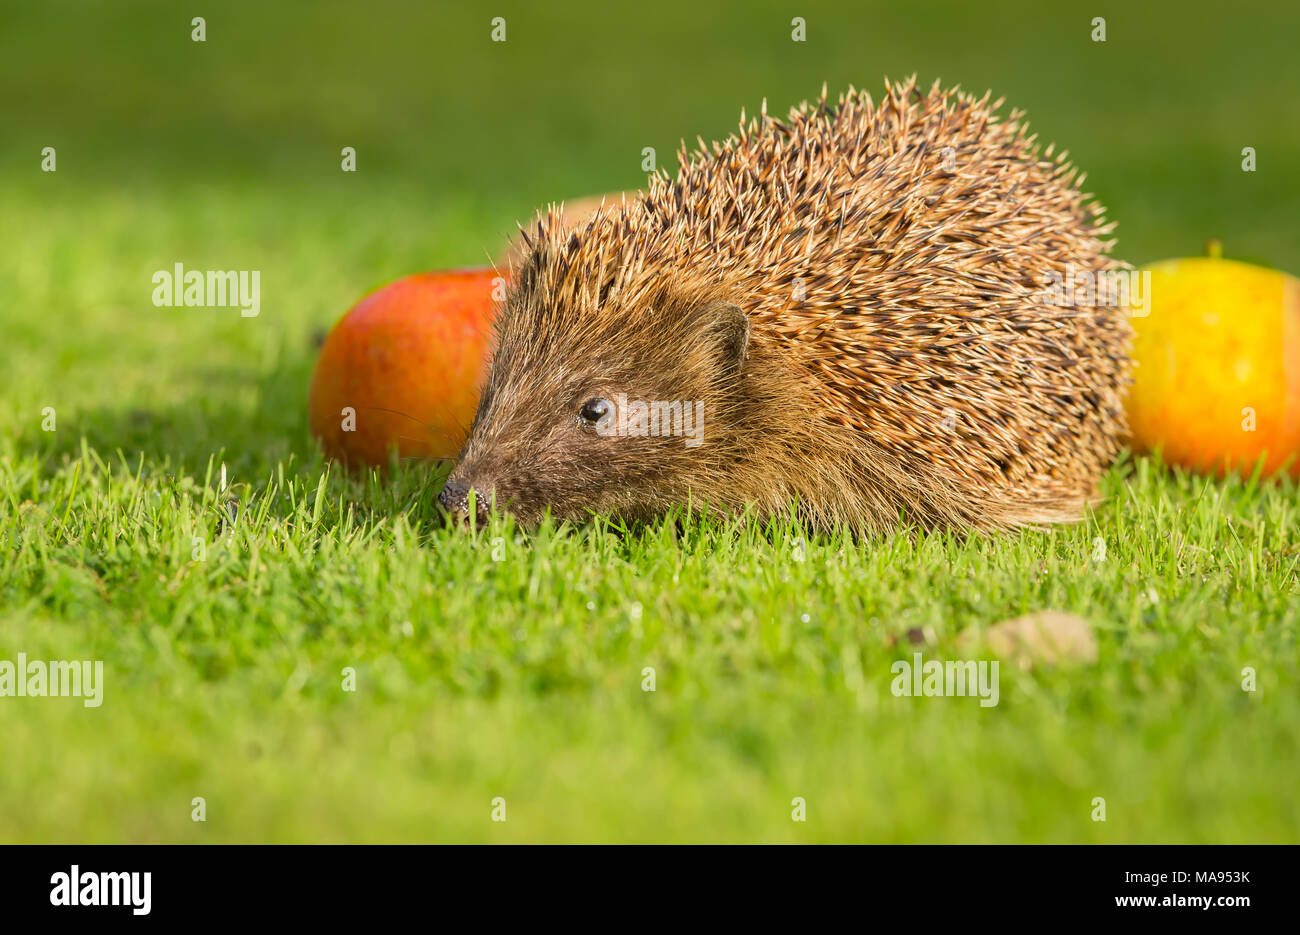 Young hedgehog on green grass, facing left with two apples at either side.  Erinaceus europaeus.  Landscape Stock Photo